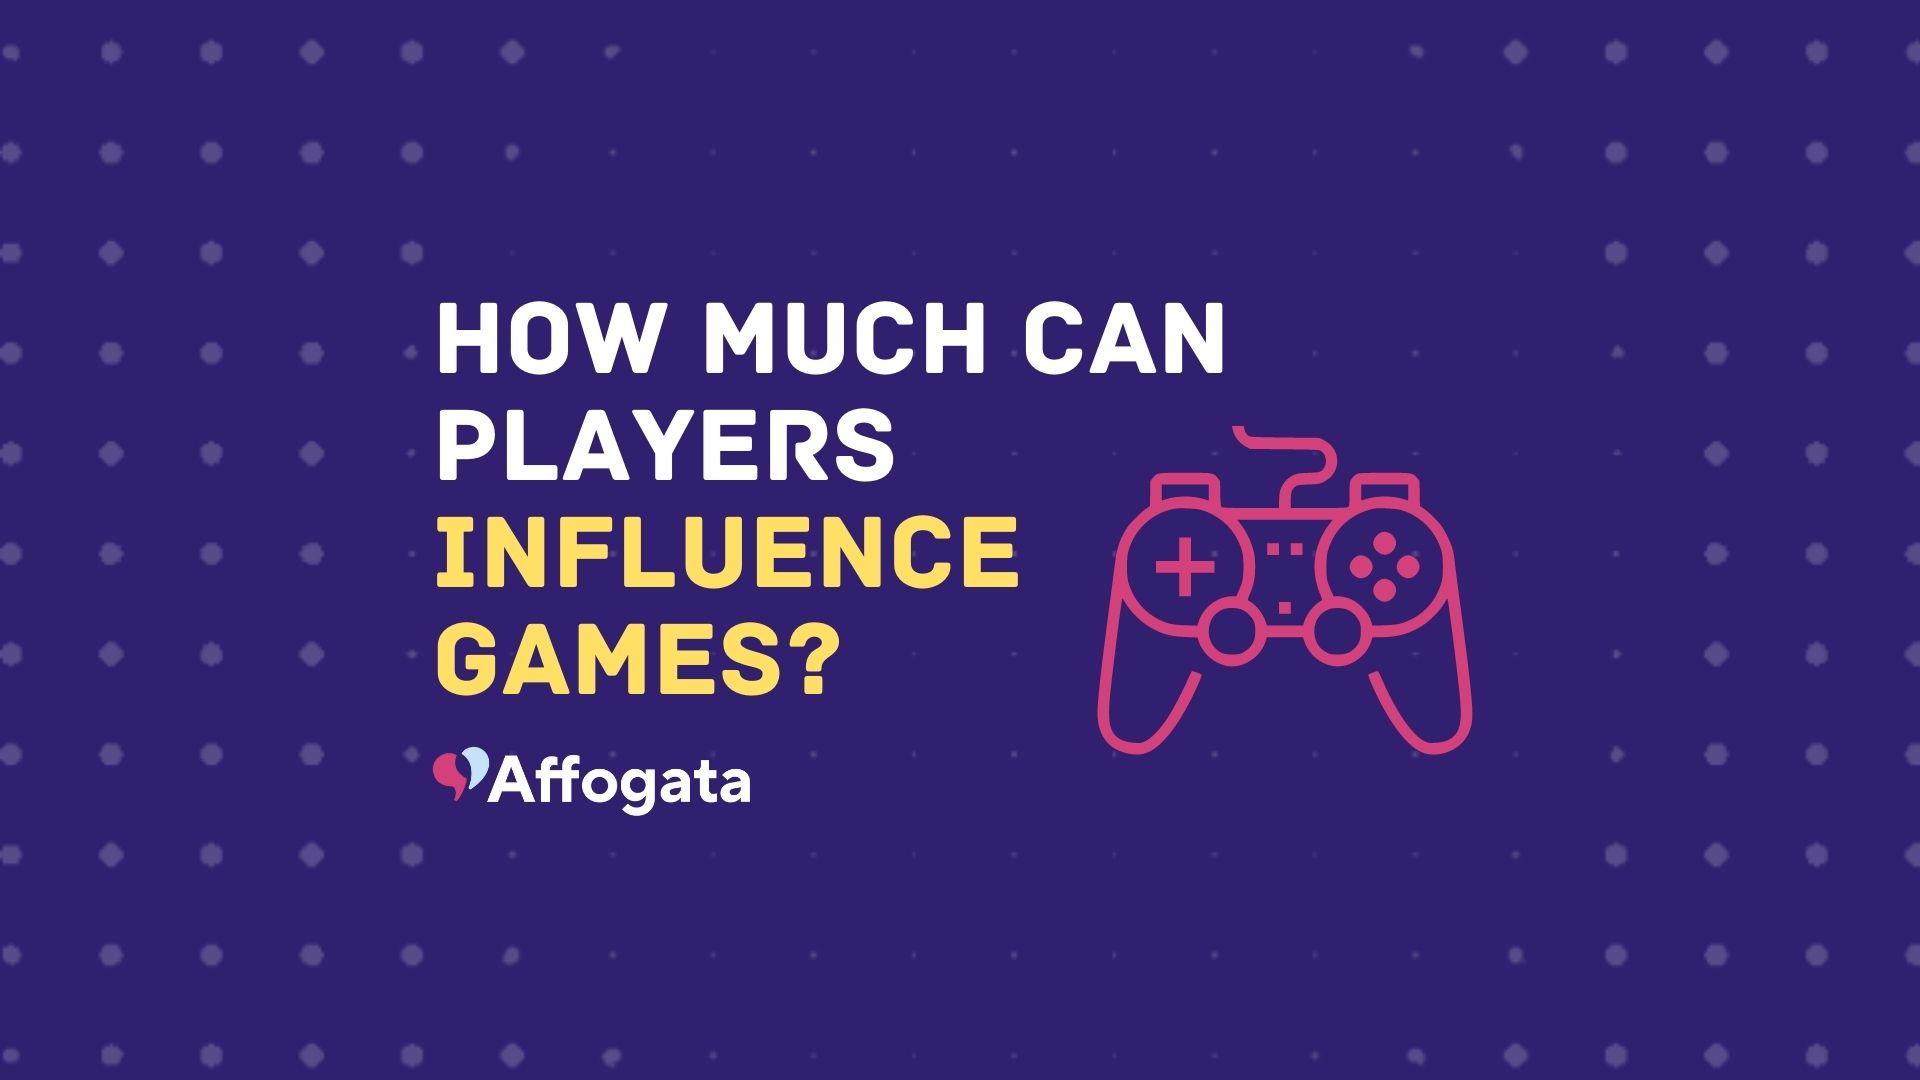 How much can players influence games?